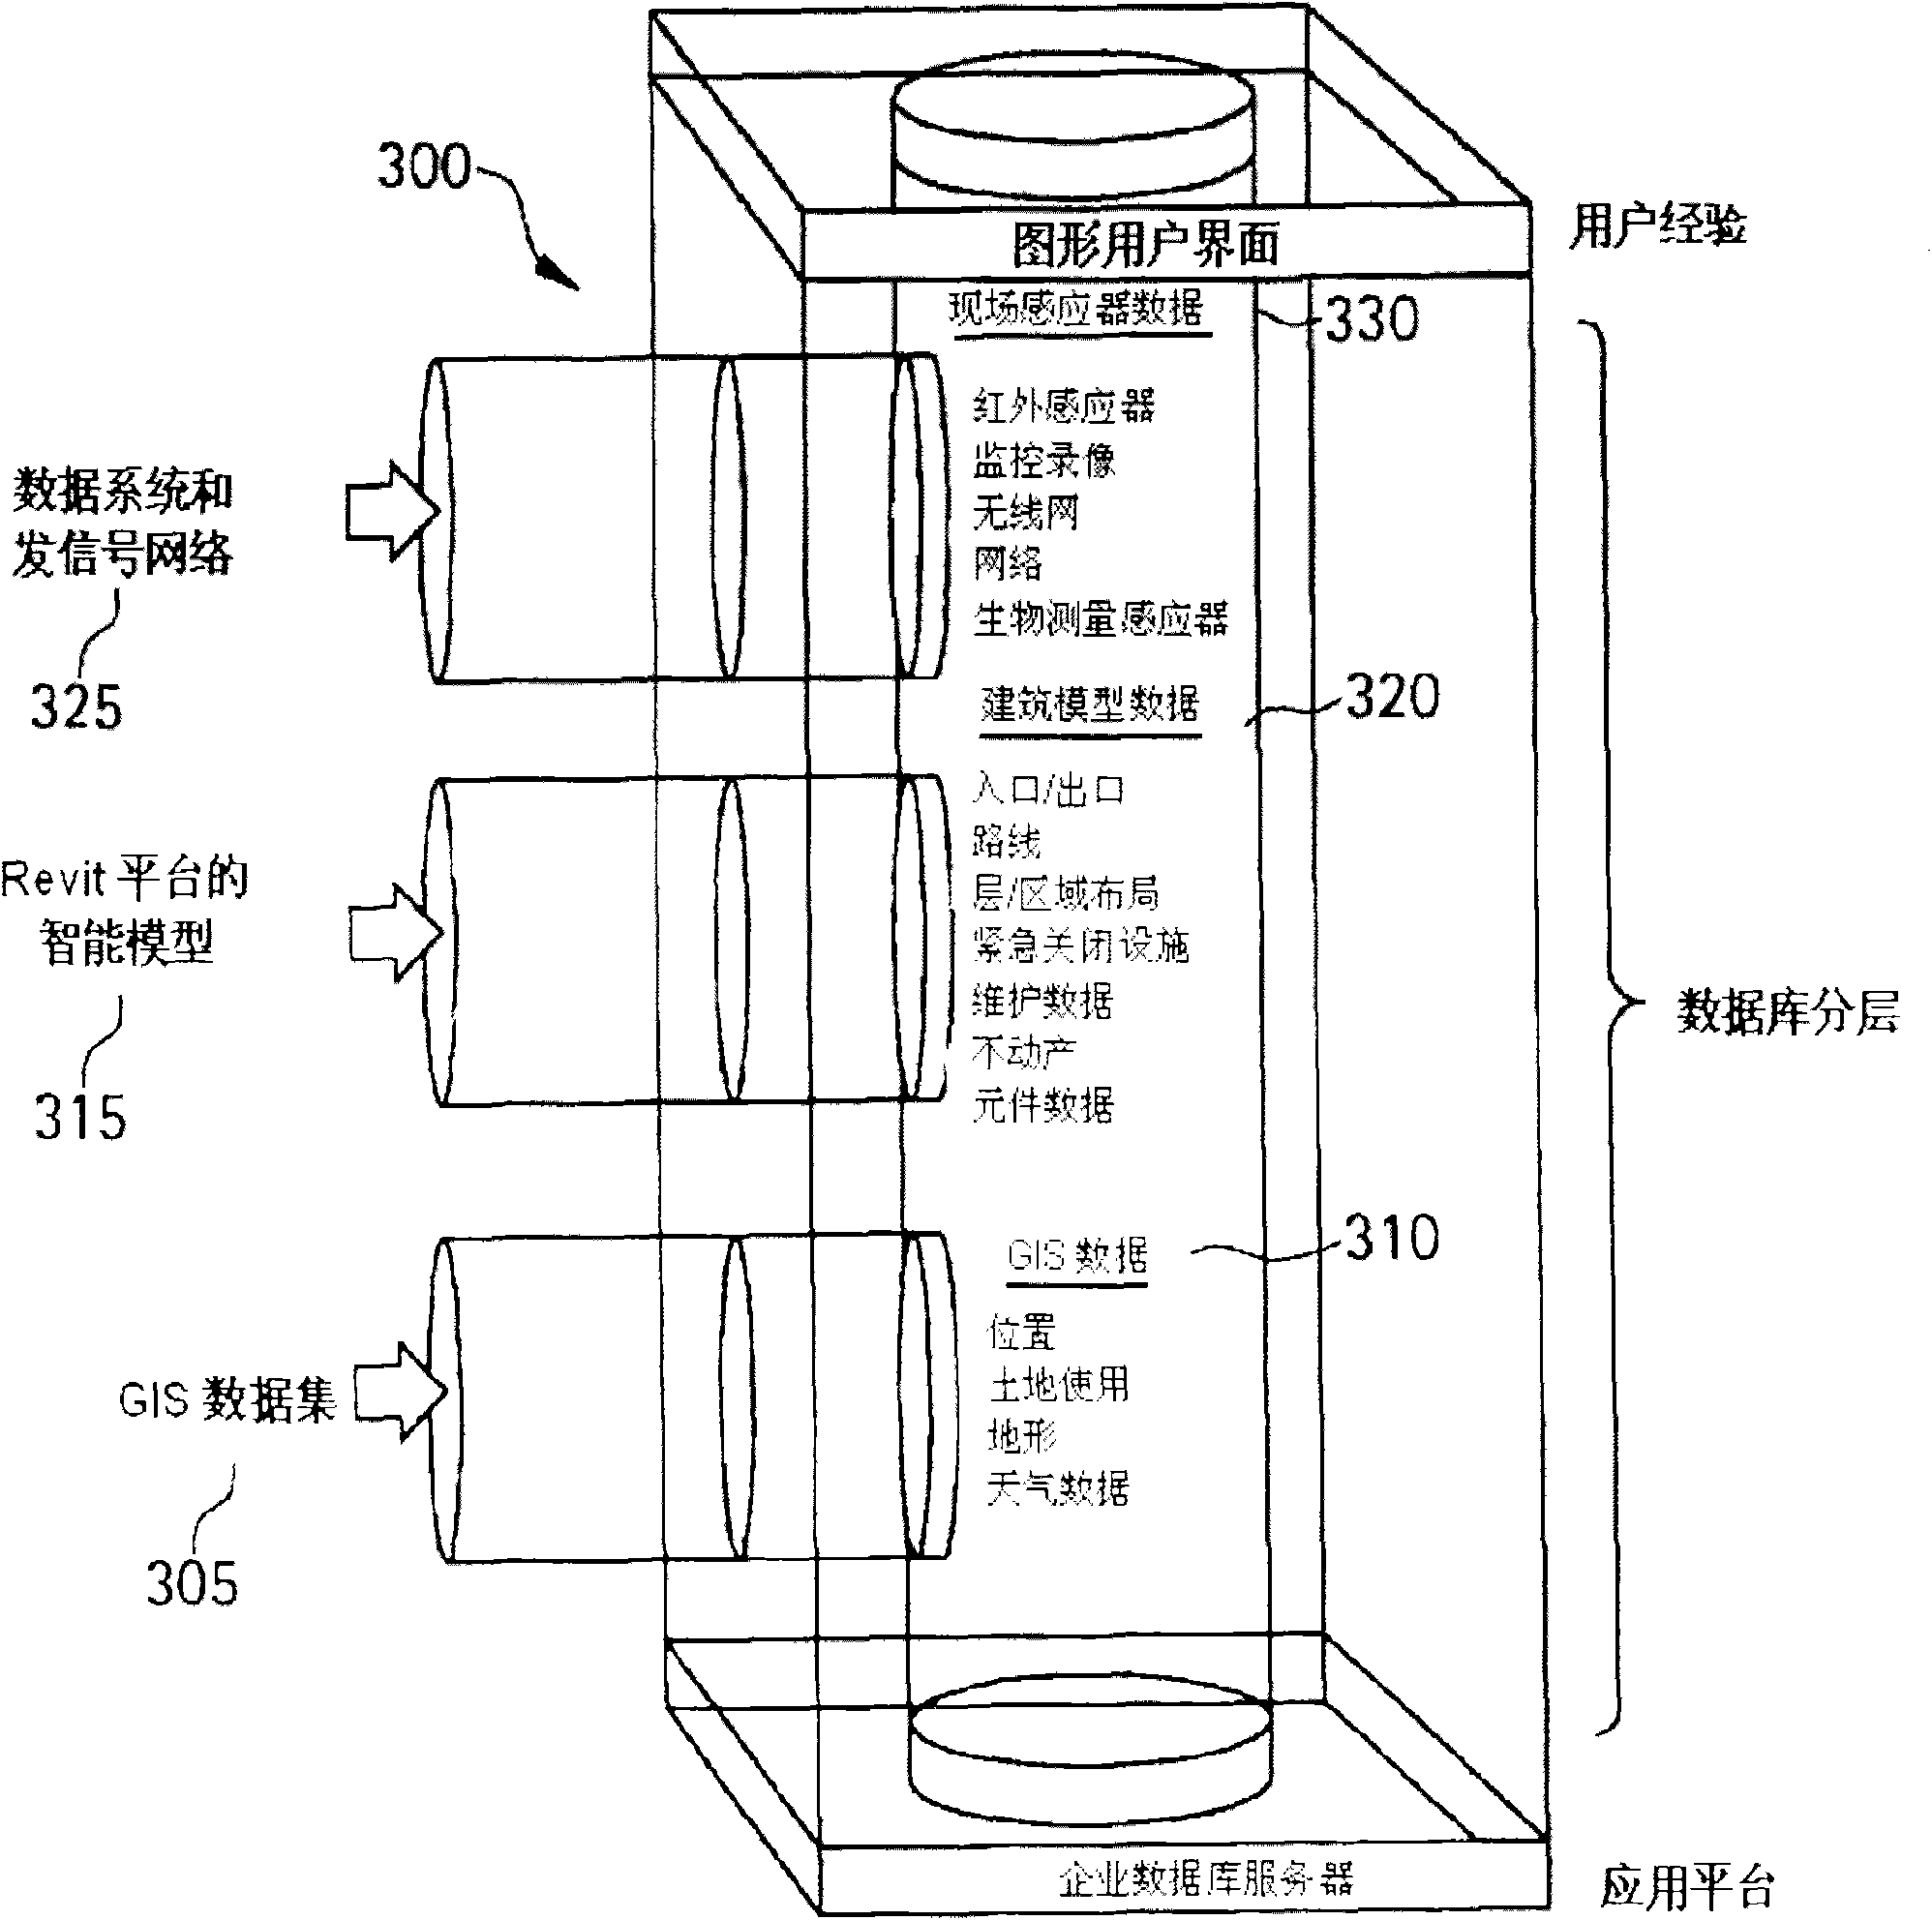 Computer-based system and method for providing situational awareness for a structure using three-dimensional modeling